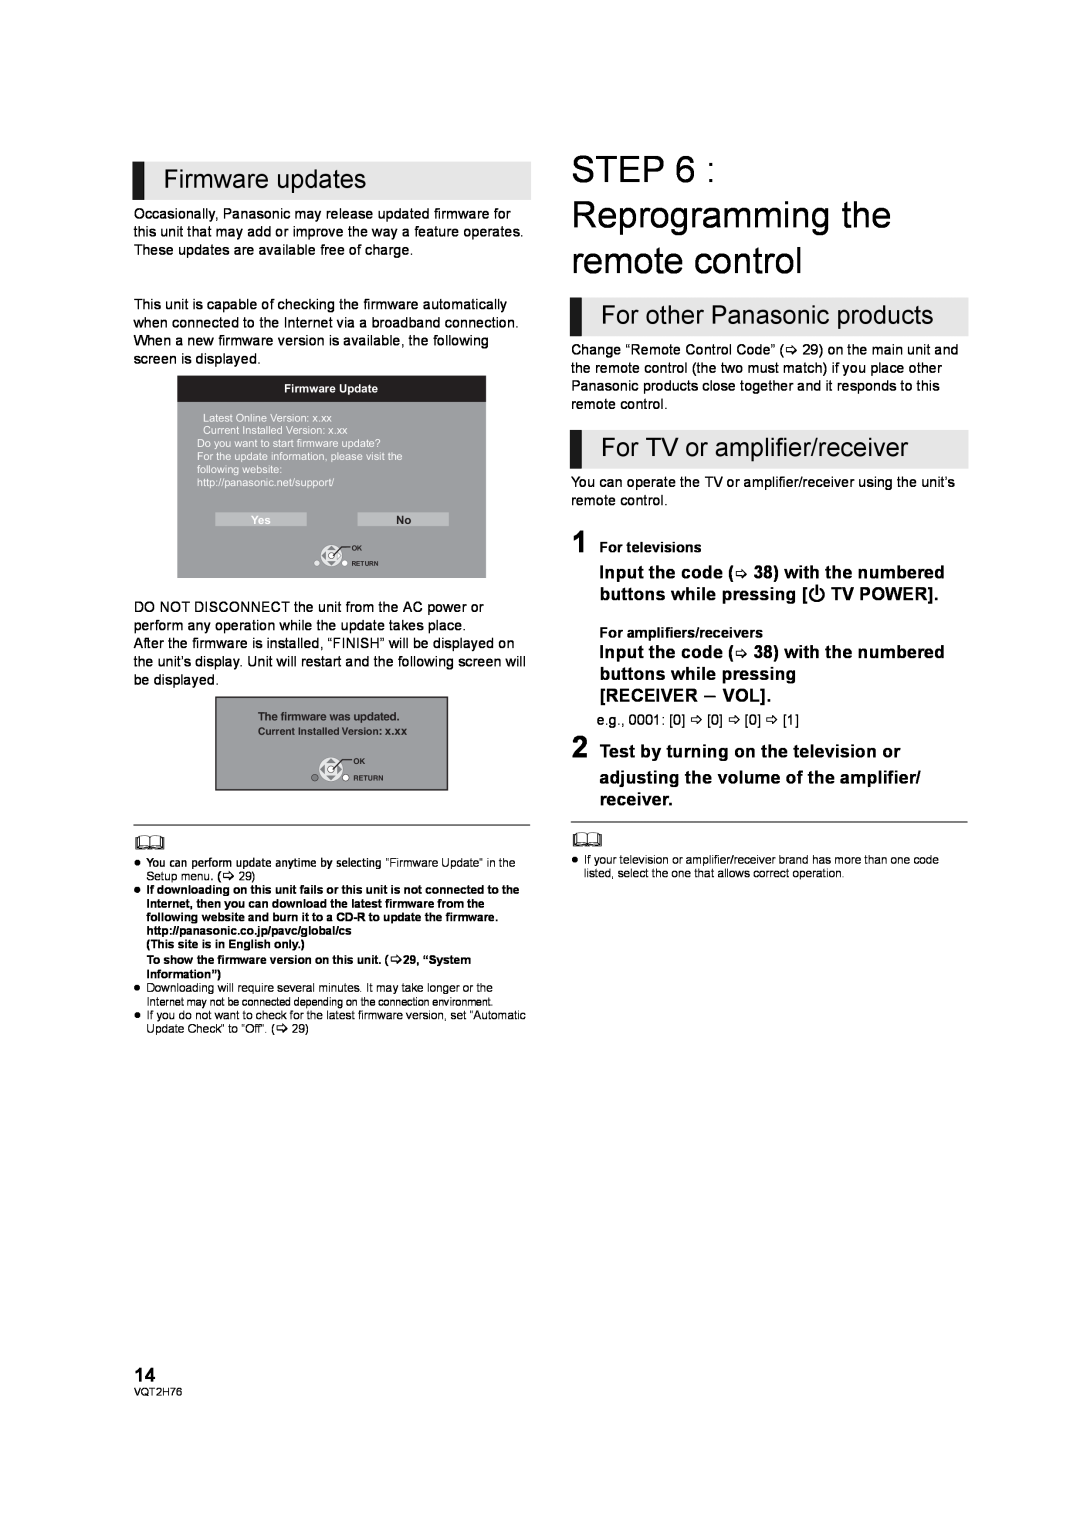 Panasonic DMP-BD85 Reprogramming the remote control, Firmware updates, For other Panasonic products, For televisions 